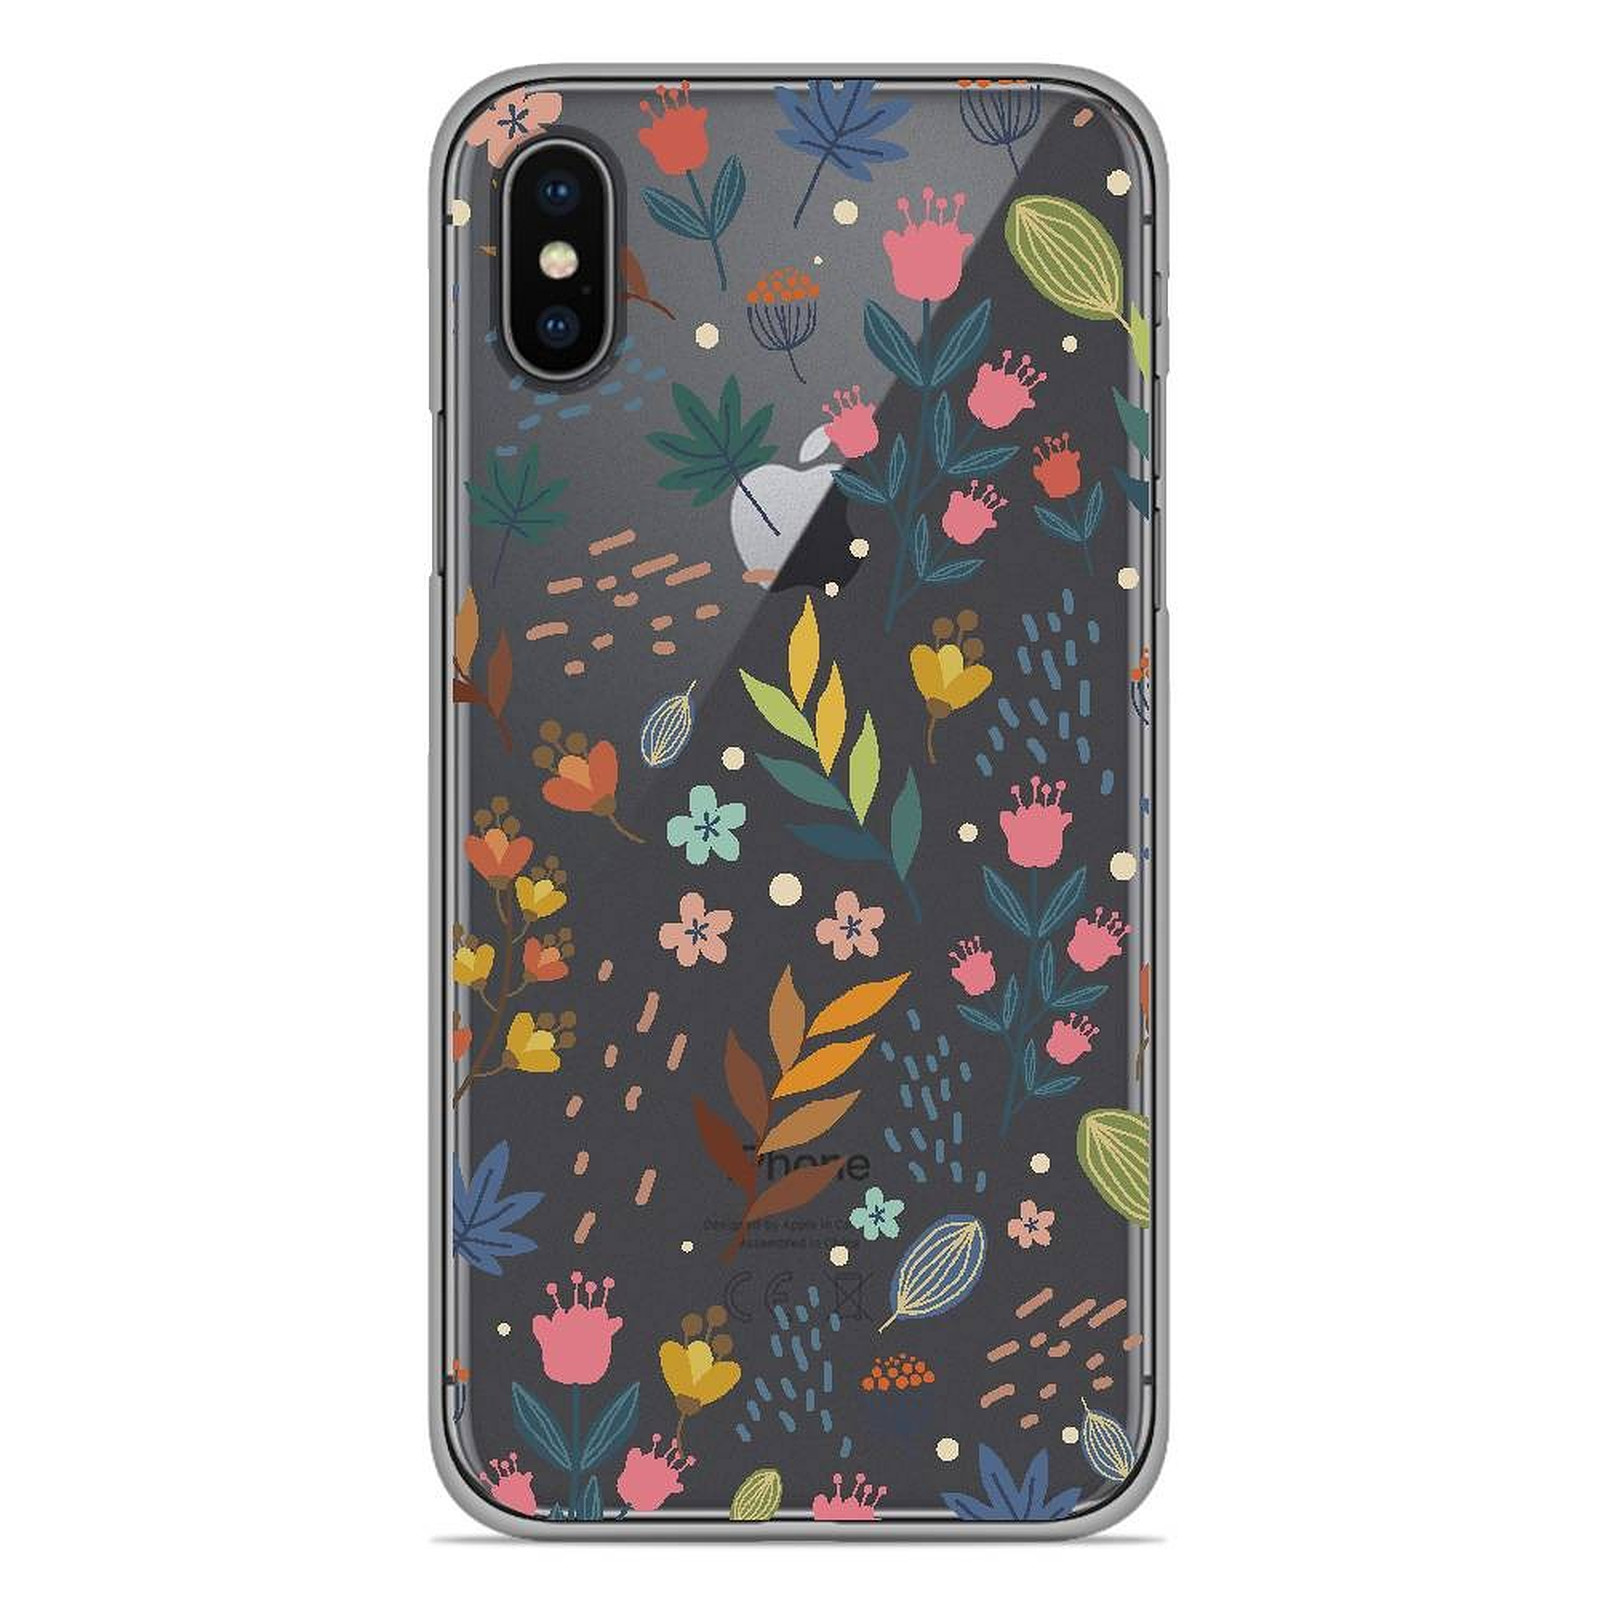 1001 Coques Coque silicone gel Apple iPhone X / XS motif Fleurs colorees - Coque telephone 1001Coques